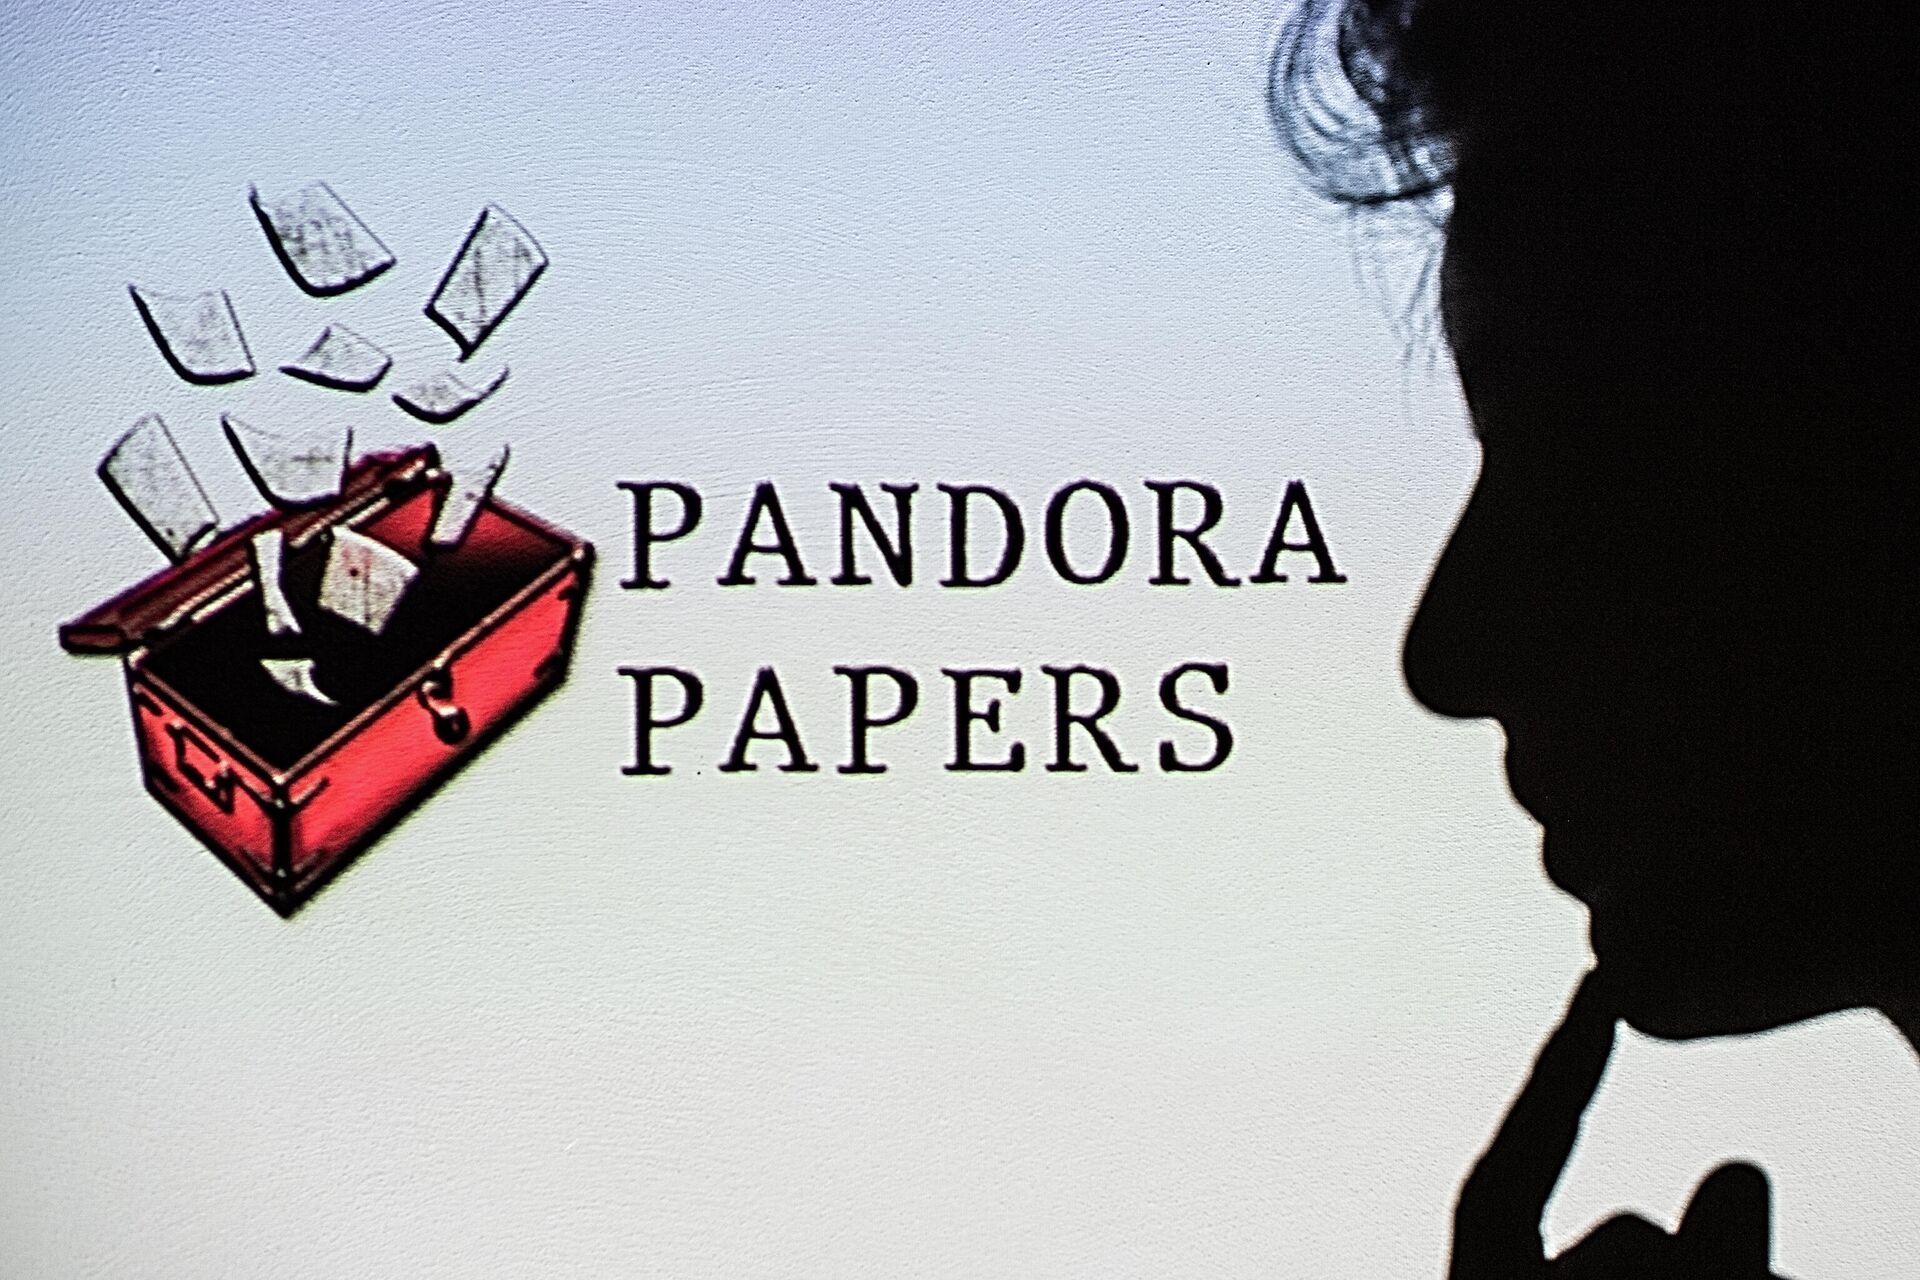 This photograph illustration shows a woman's shadow cast on the logo of Pandora Papers, in Lavau-sur-Loire, western France, on October 4, 2021 - Sputnik International, 1920, 04.10.2021